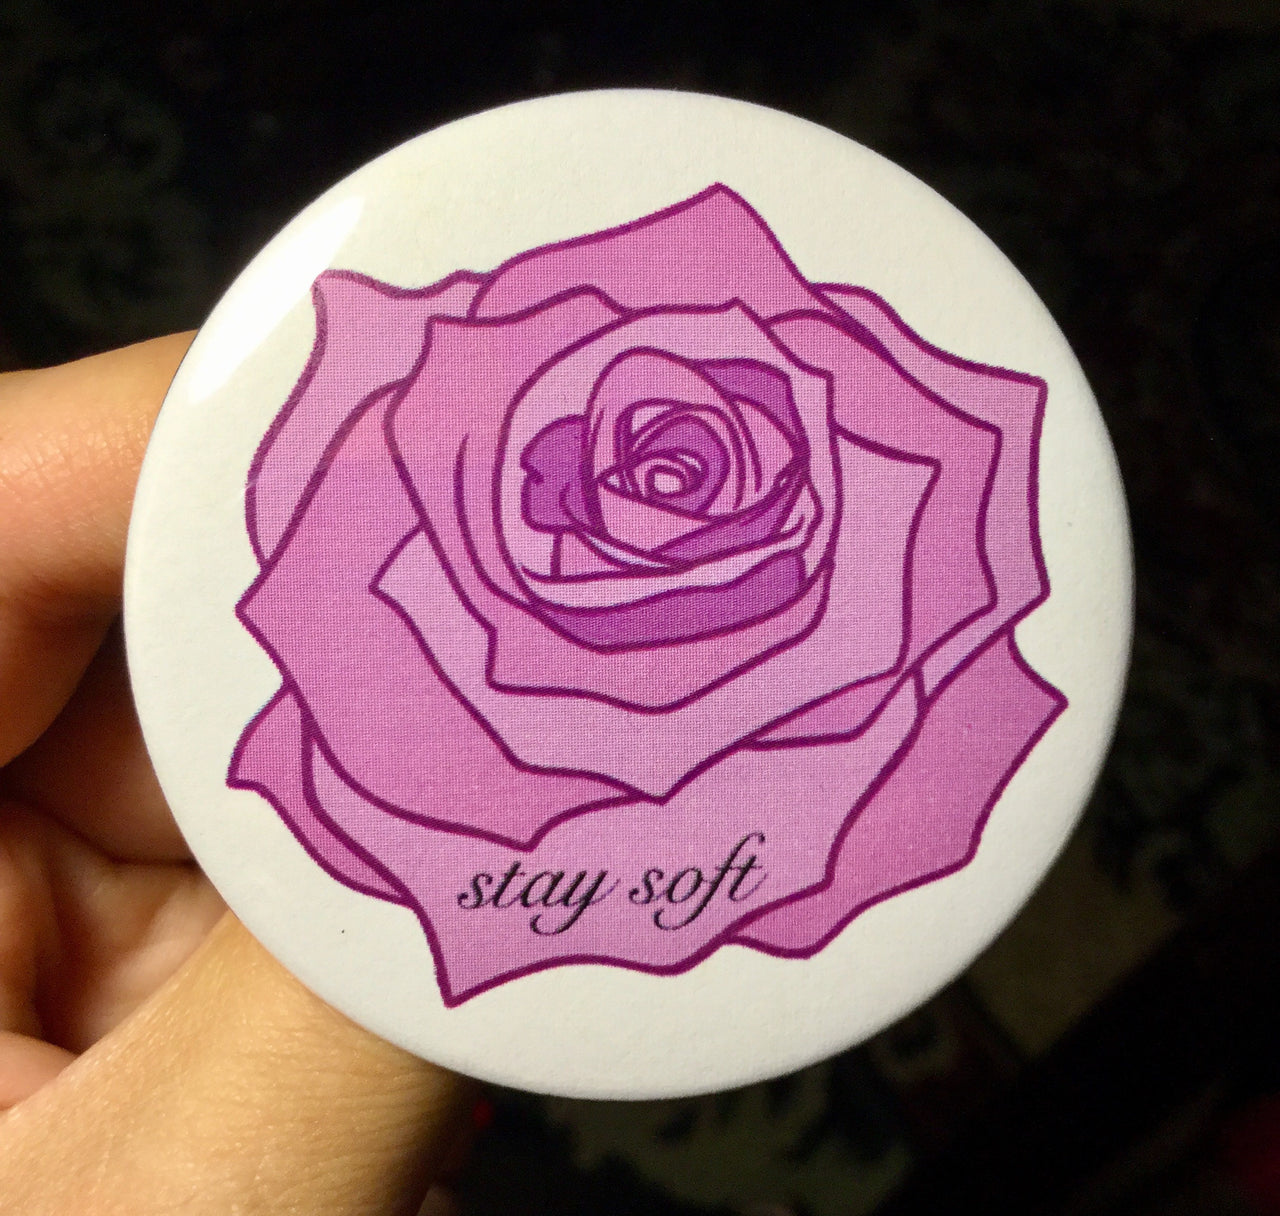 Stay soft rose - Radical Buttons